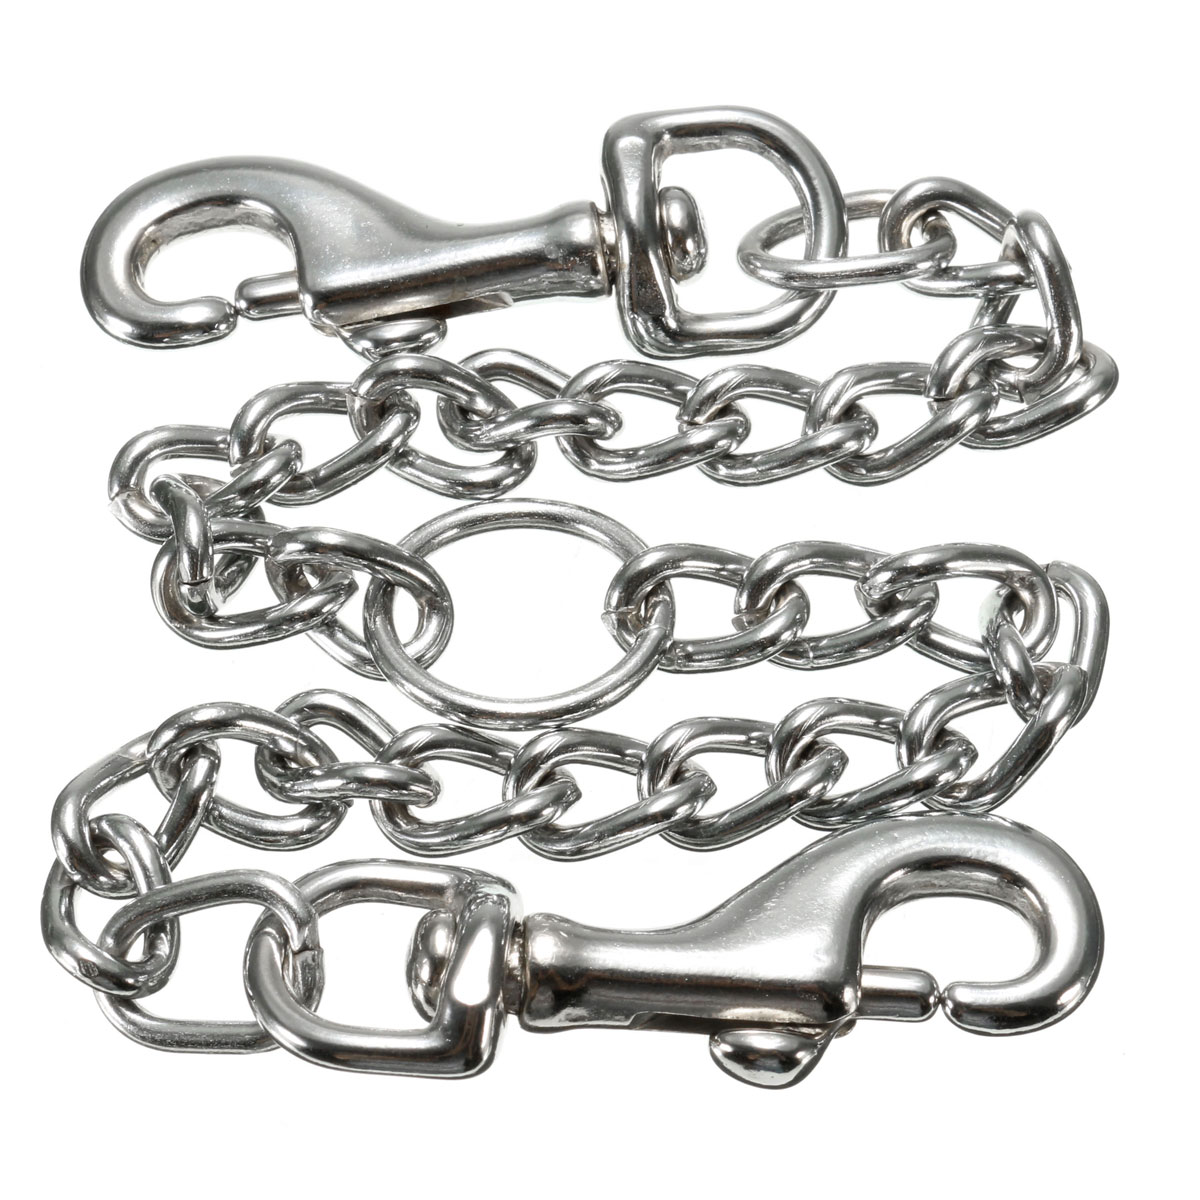 Stainless-Double-Headed-Dog-Traction-Rope-Pet-Coupler-Twin-Lead-Bite-Resistant-Pet-Chain-1333618